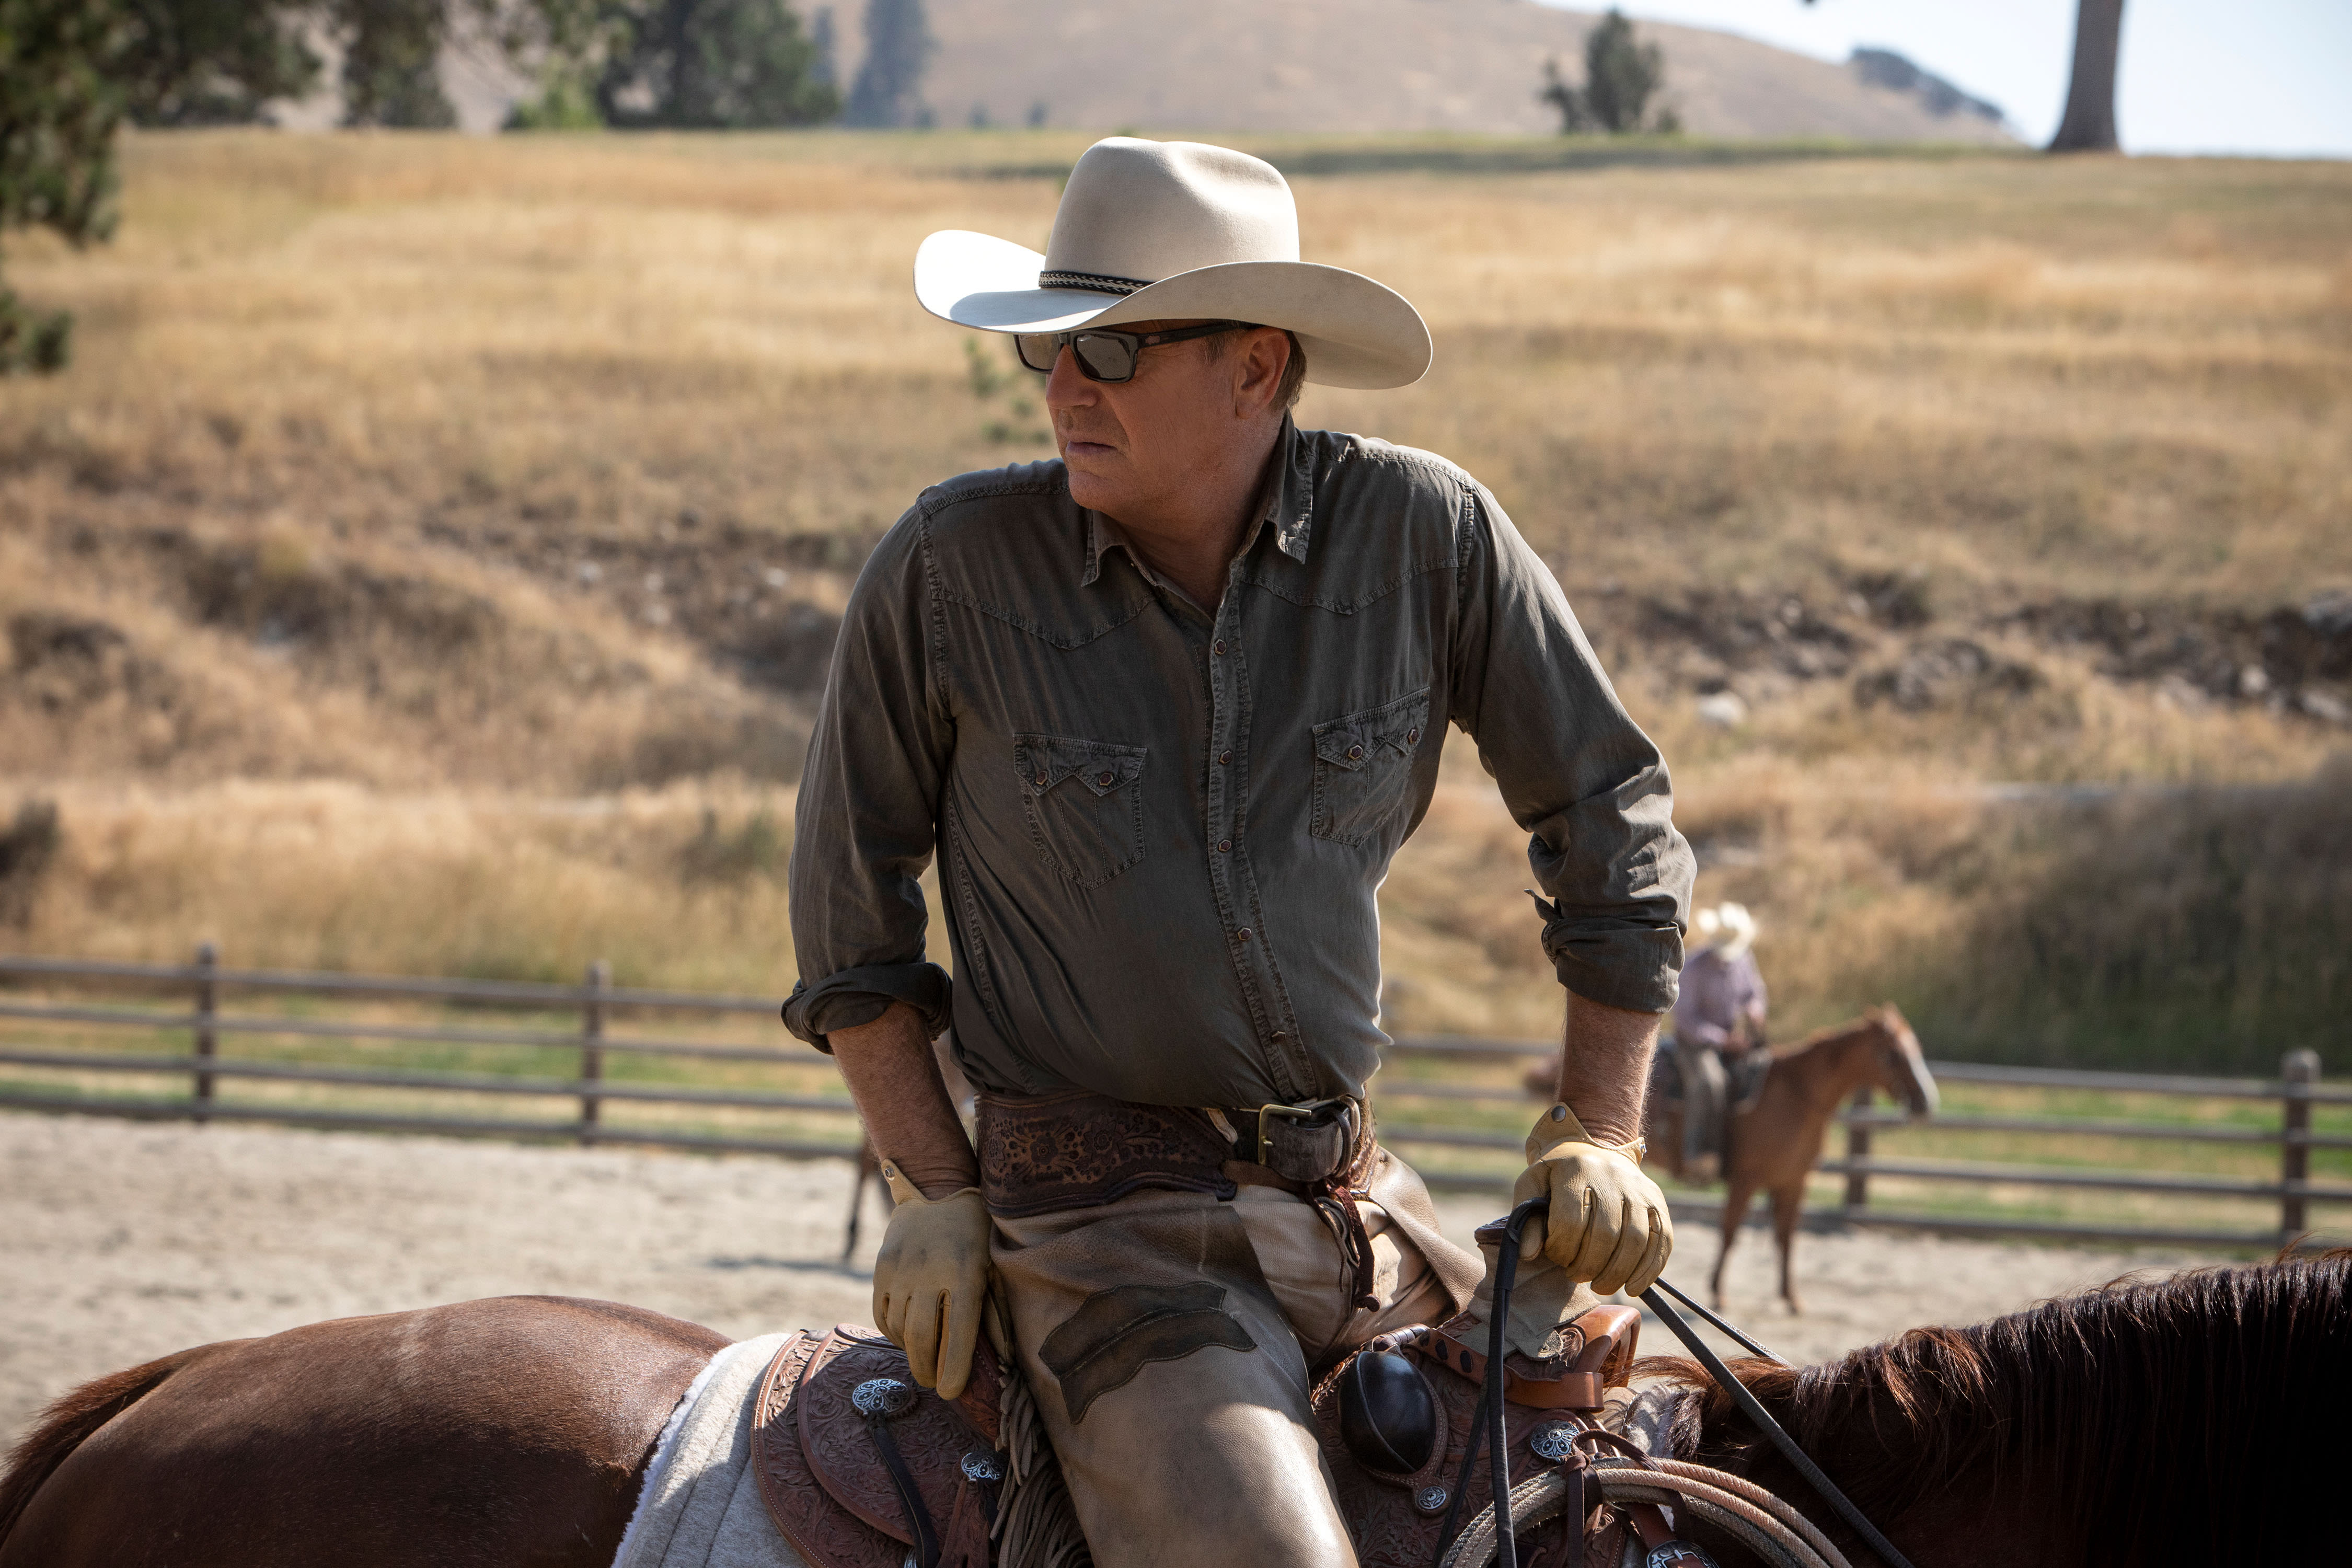 Kevin Costner Remains Open To Returning To ‘Yellowstone’ “Under The Right Circumstances”